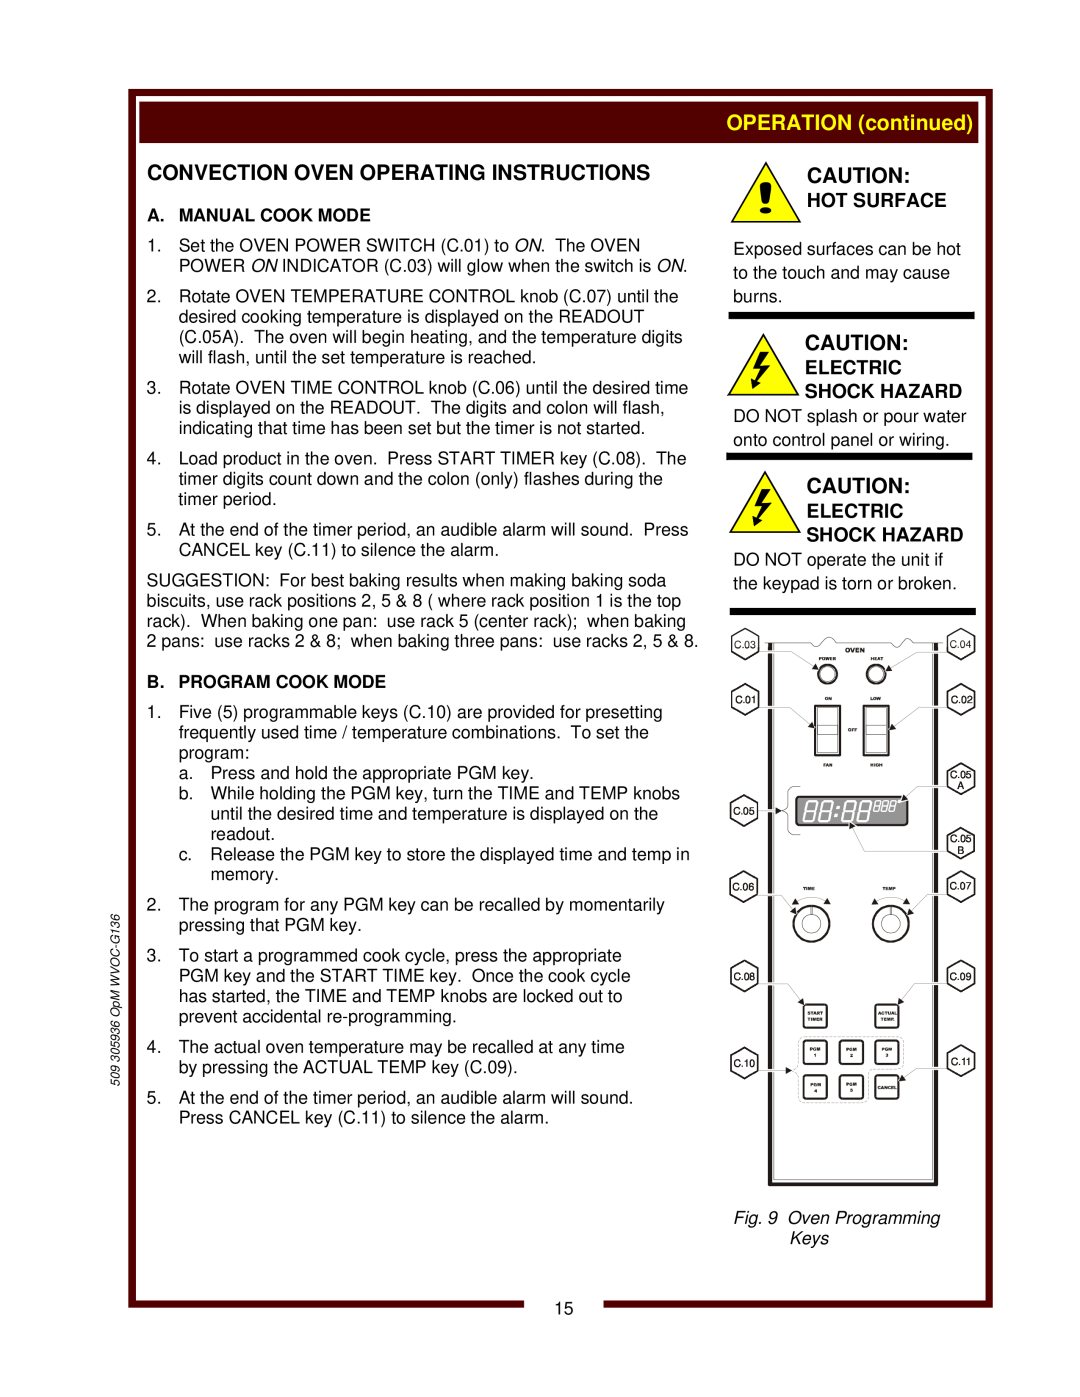 Bloomfield WVOC-G136 Convection Oven Operating Instructions, A. Manual Cook Mode, B. Program Cook Mode, Hot Surface 